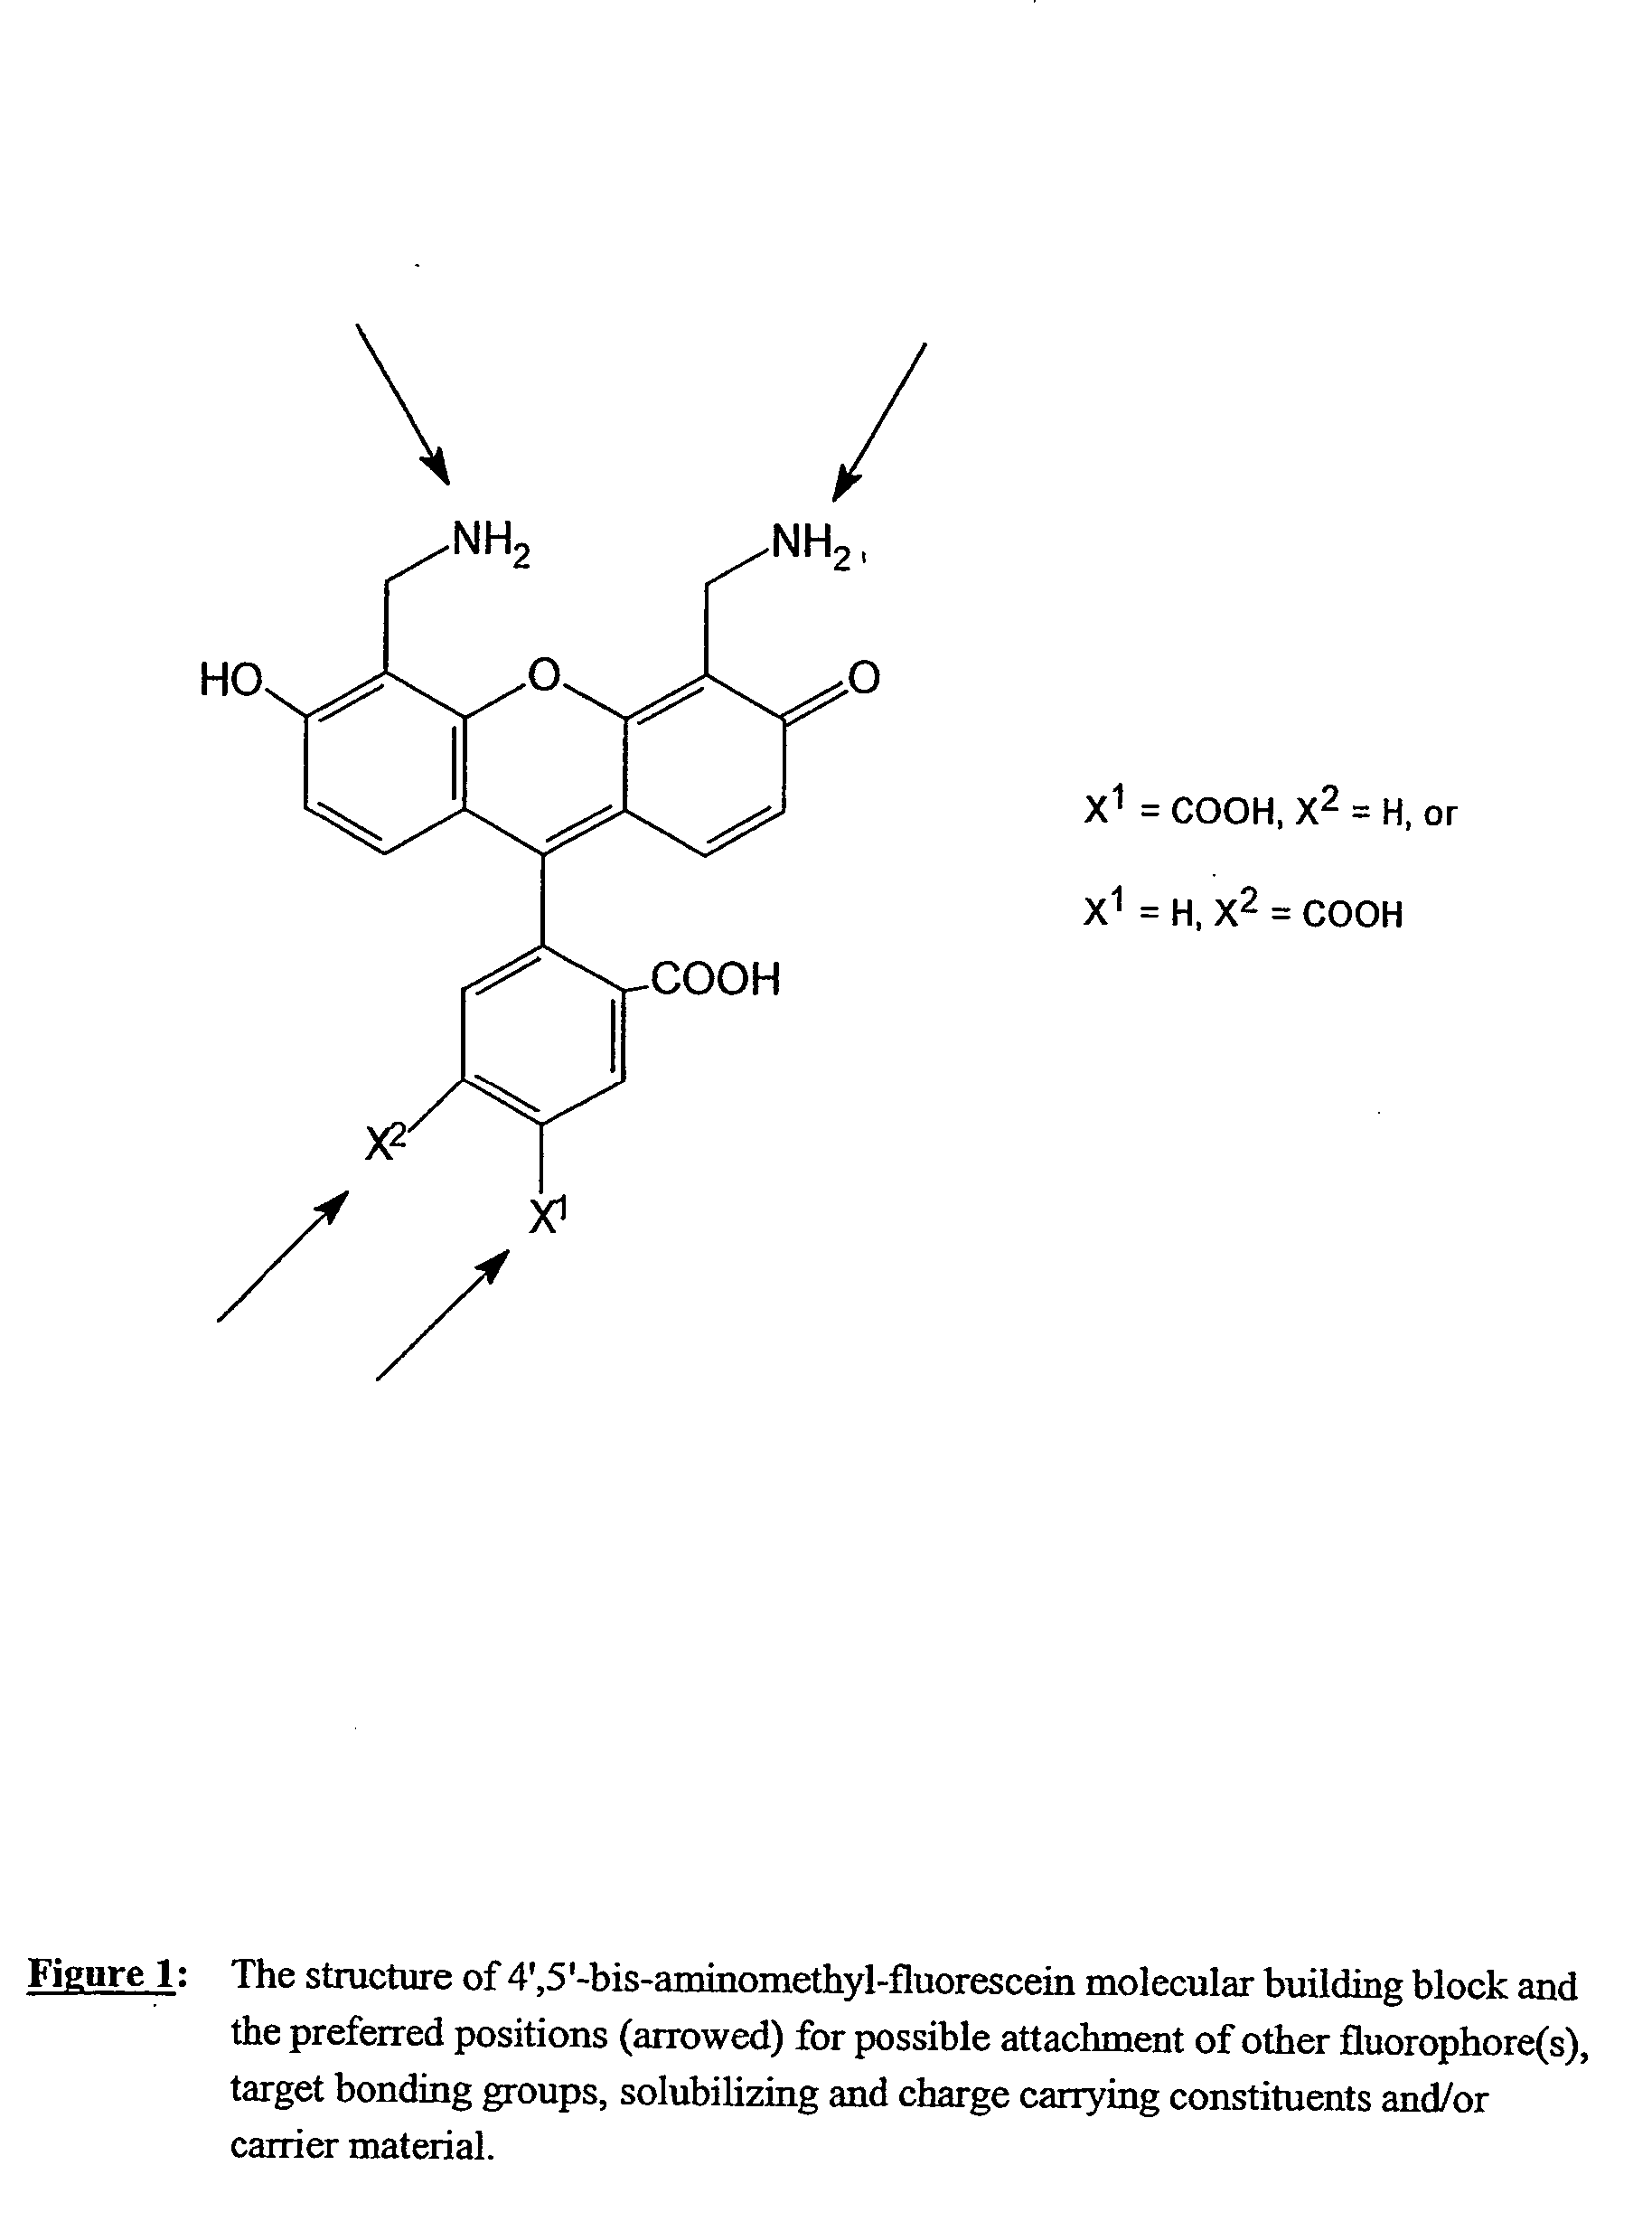 Fluorescent labeling reagents with multiple donors and acceptors